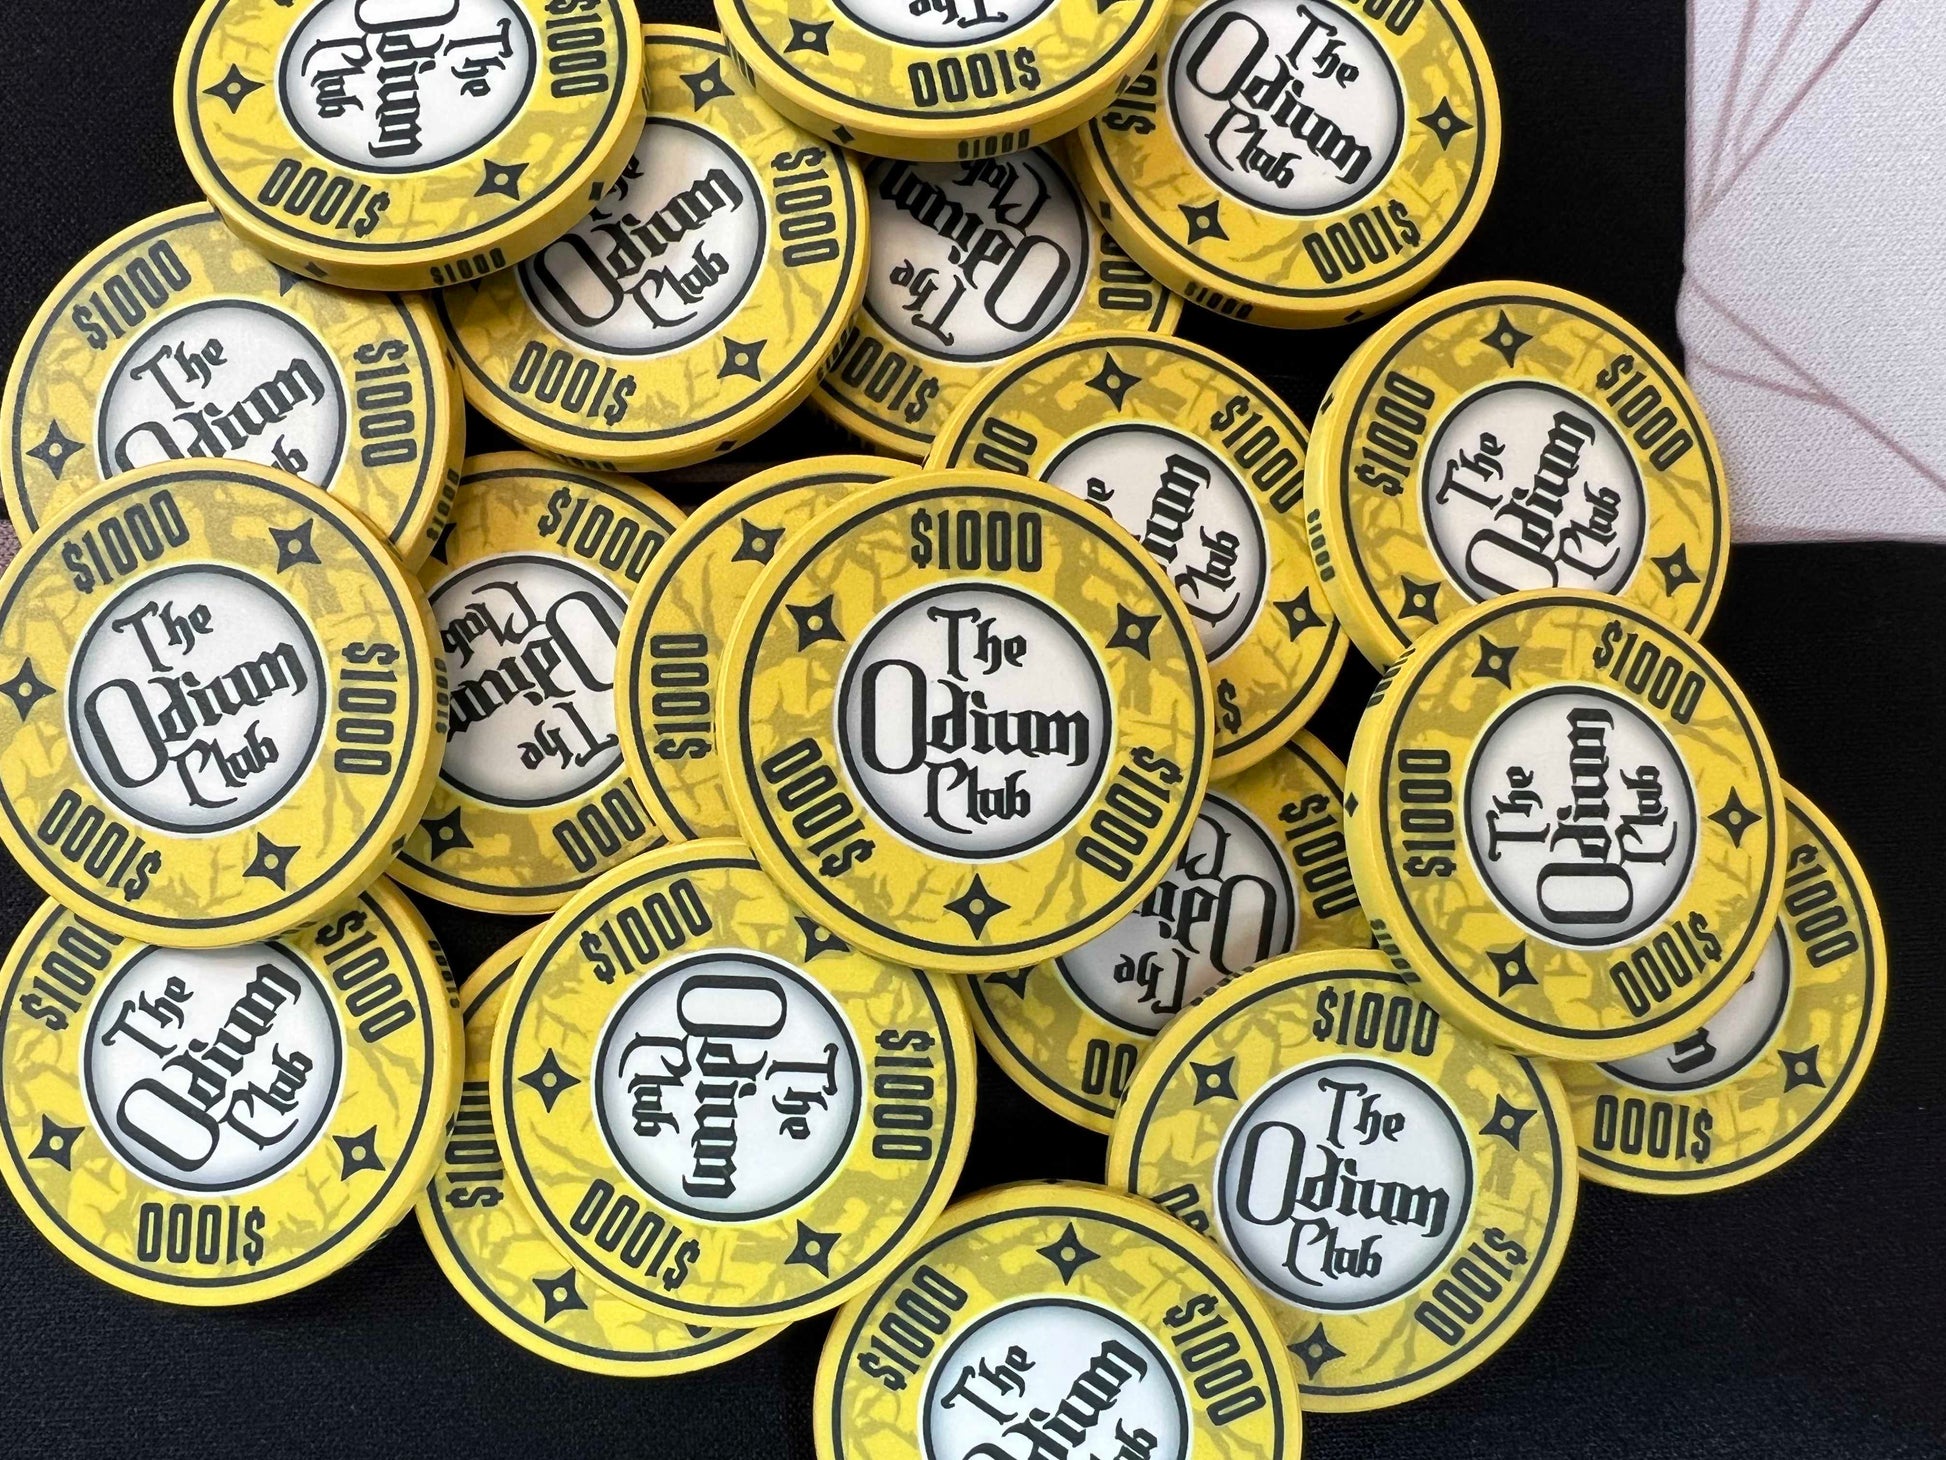 Shown here are the Odium Club 1000 dollar yellow chips in a pot. These are 39mm chips (actually closer to 40mm), which is the "official" size of poker chips. They are the normal poker chip thickness of 3.3mm or 0.13 inches. Whether you're an affluent member of society and you need $1000 chips to host ultra-mega high stakes poker games...or whether you're brand new to the game of poker, these are the absolute best texas holdem poker chips available.